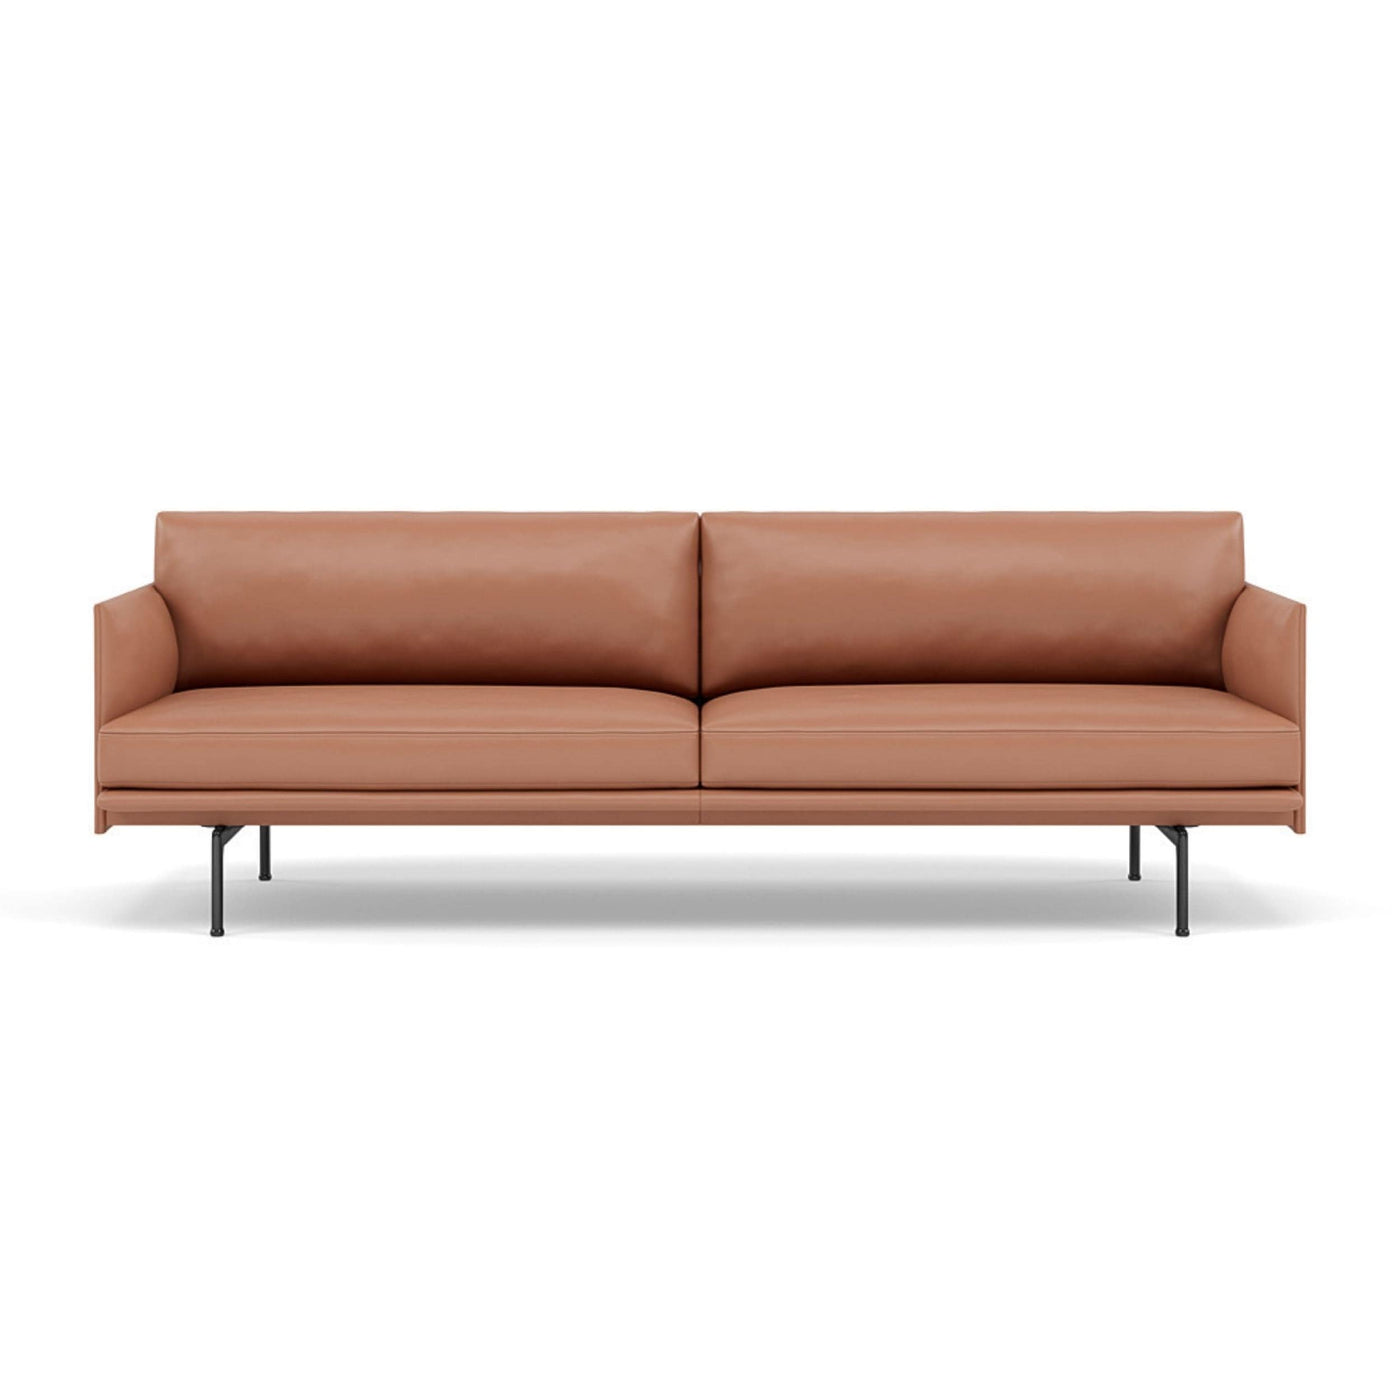 Muuto Outline  Studio Sofa 220 in cognac refine leather and black legs. Made to order from someday designs. #colour_cognac-refine-leather